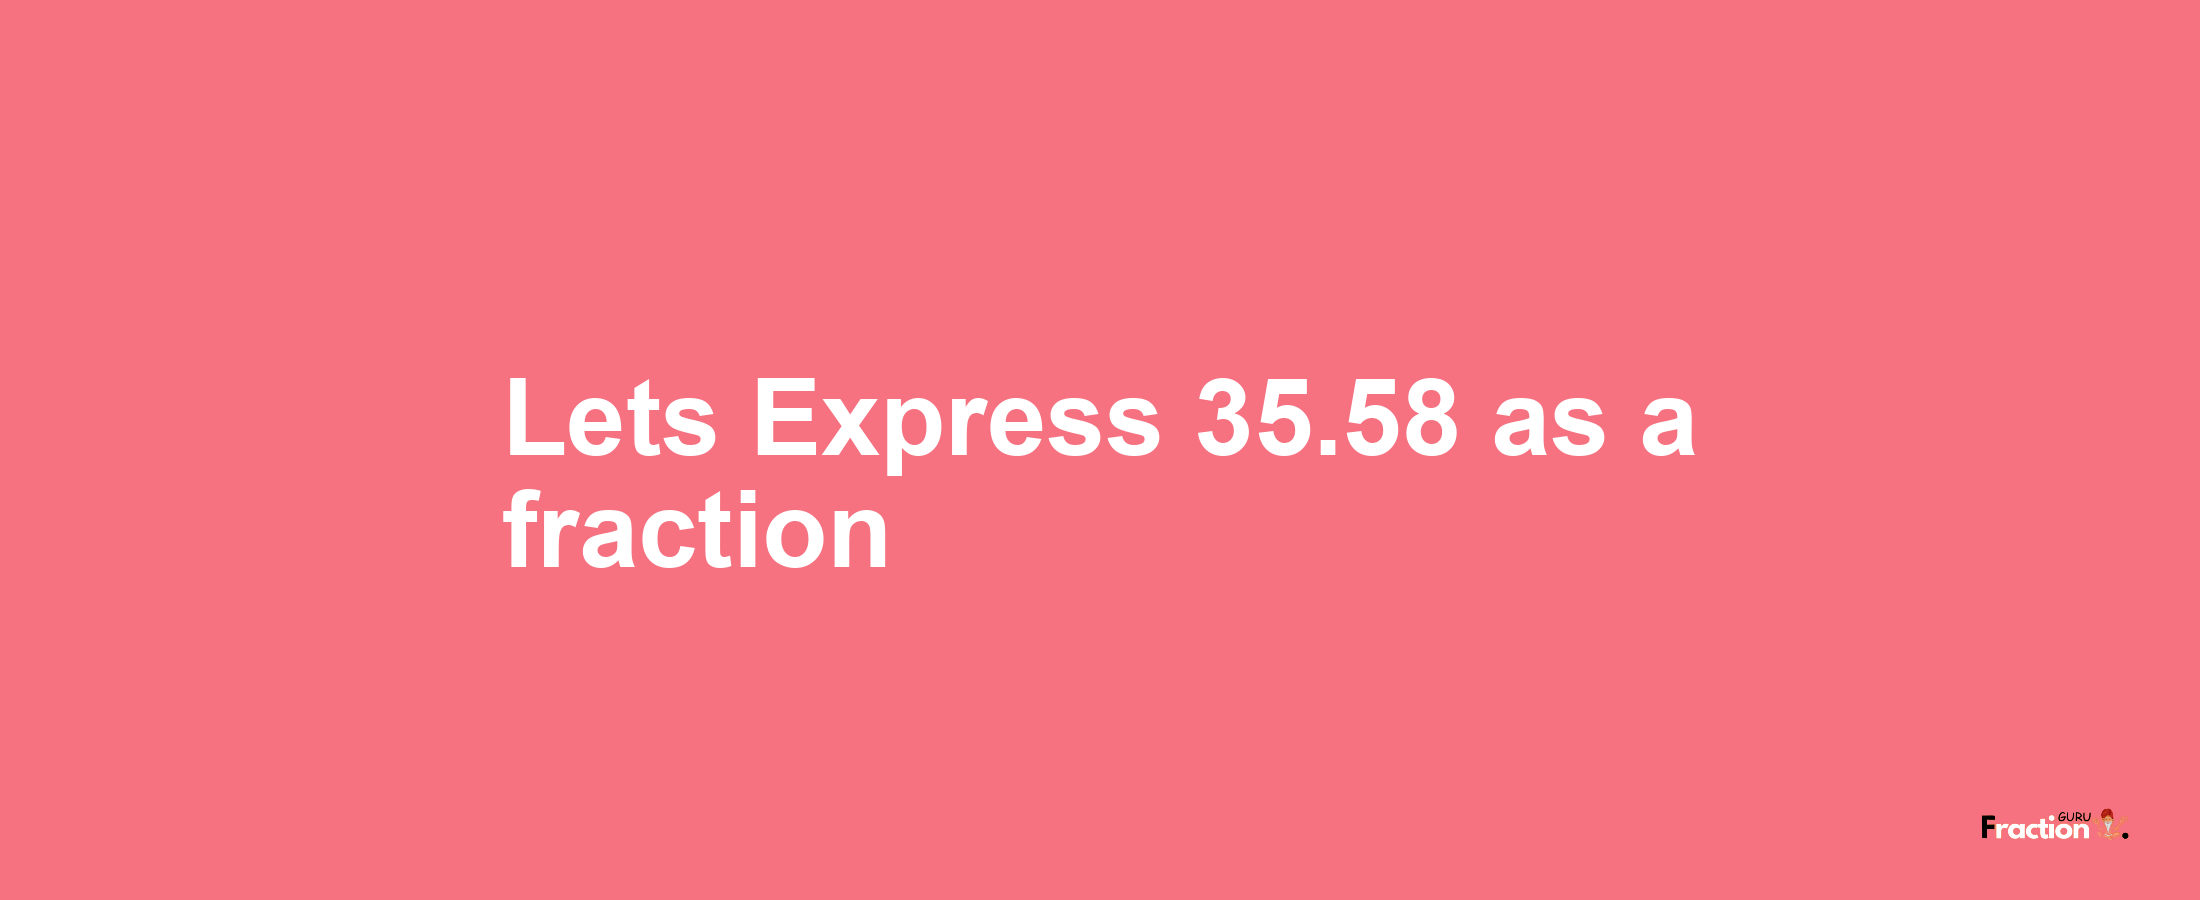 Lets Express 35.58 as afraction